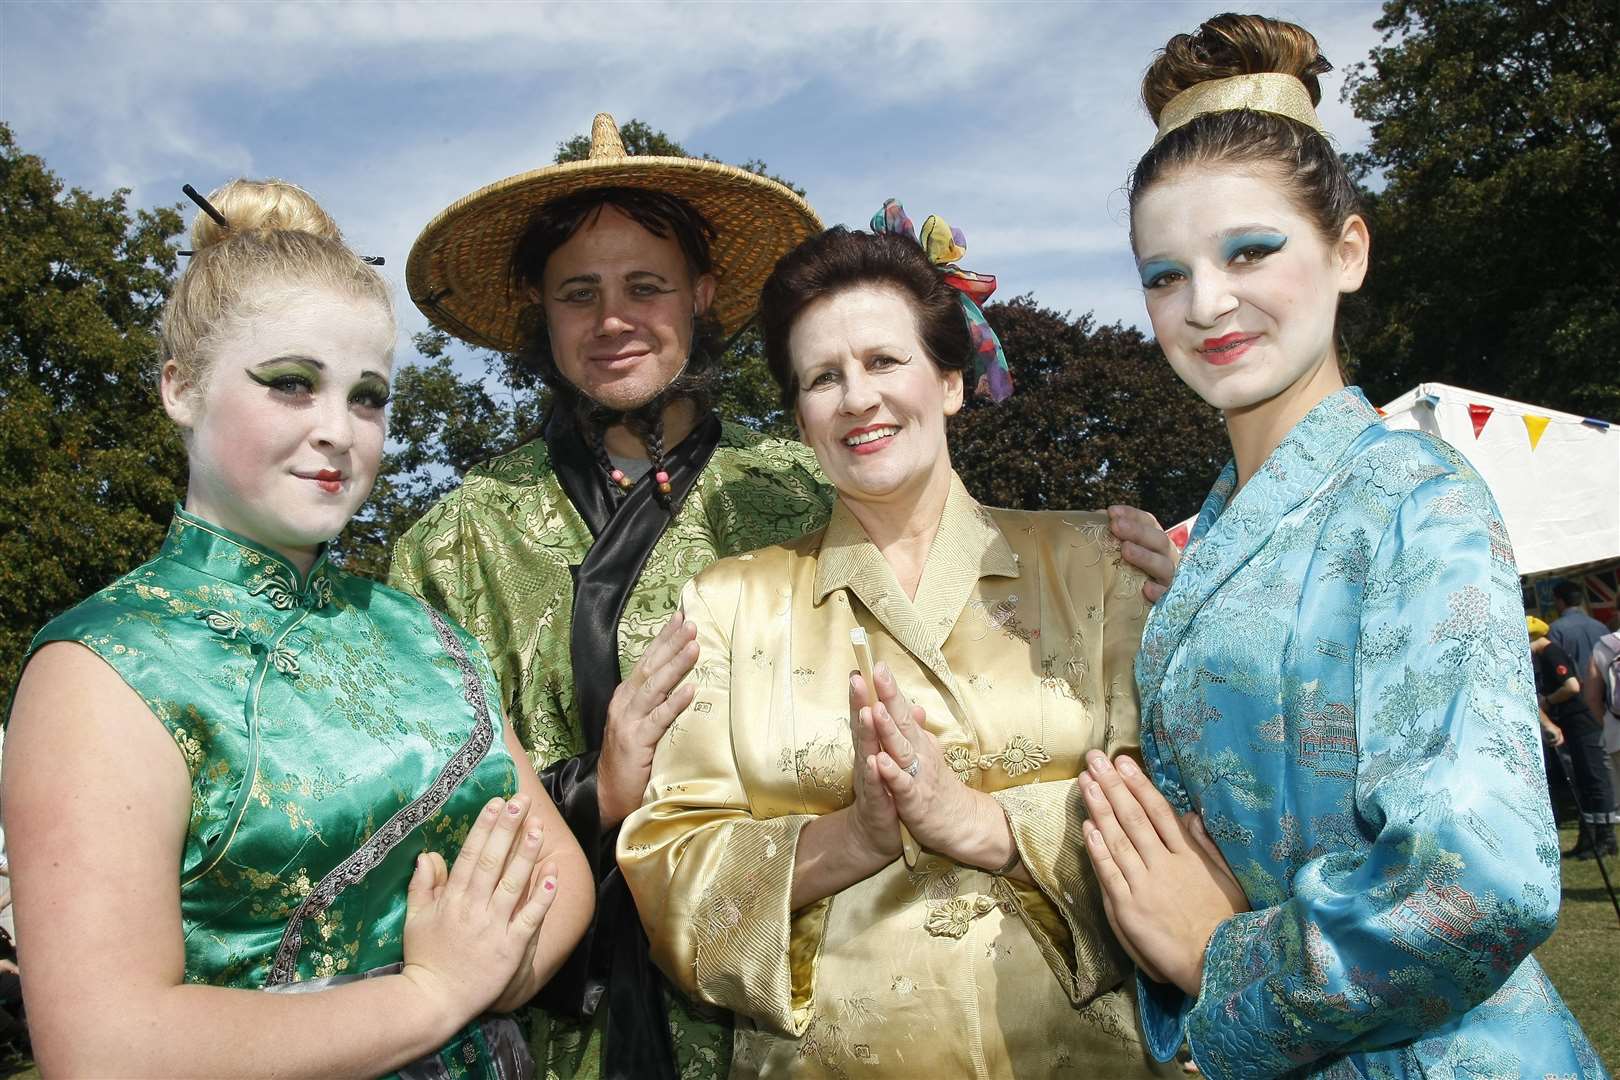 Pictured in 2012, Rae Hume with Grant Baker, Debbie Brennan and Christina Campbell at a festival in Medway